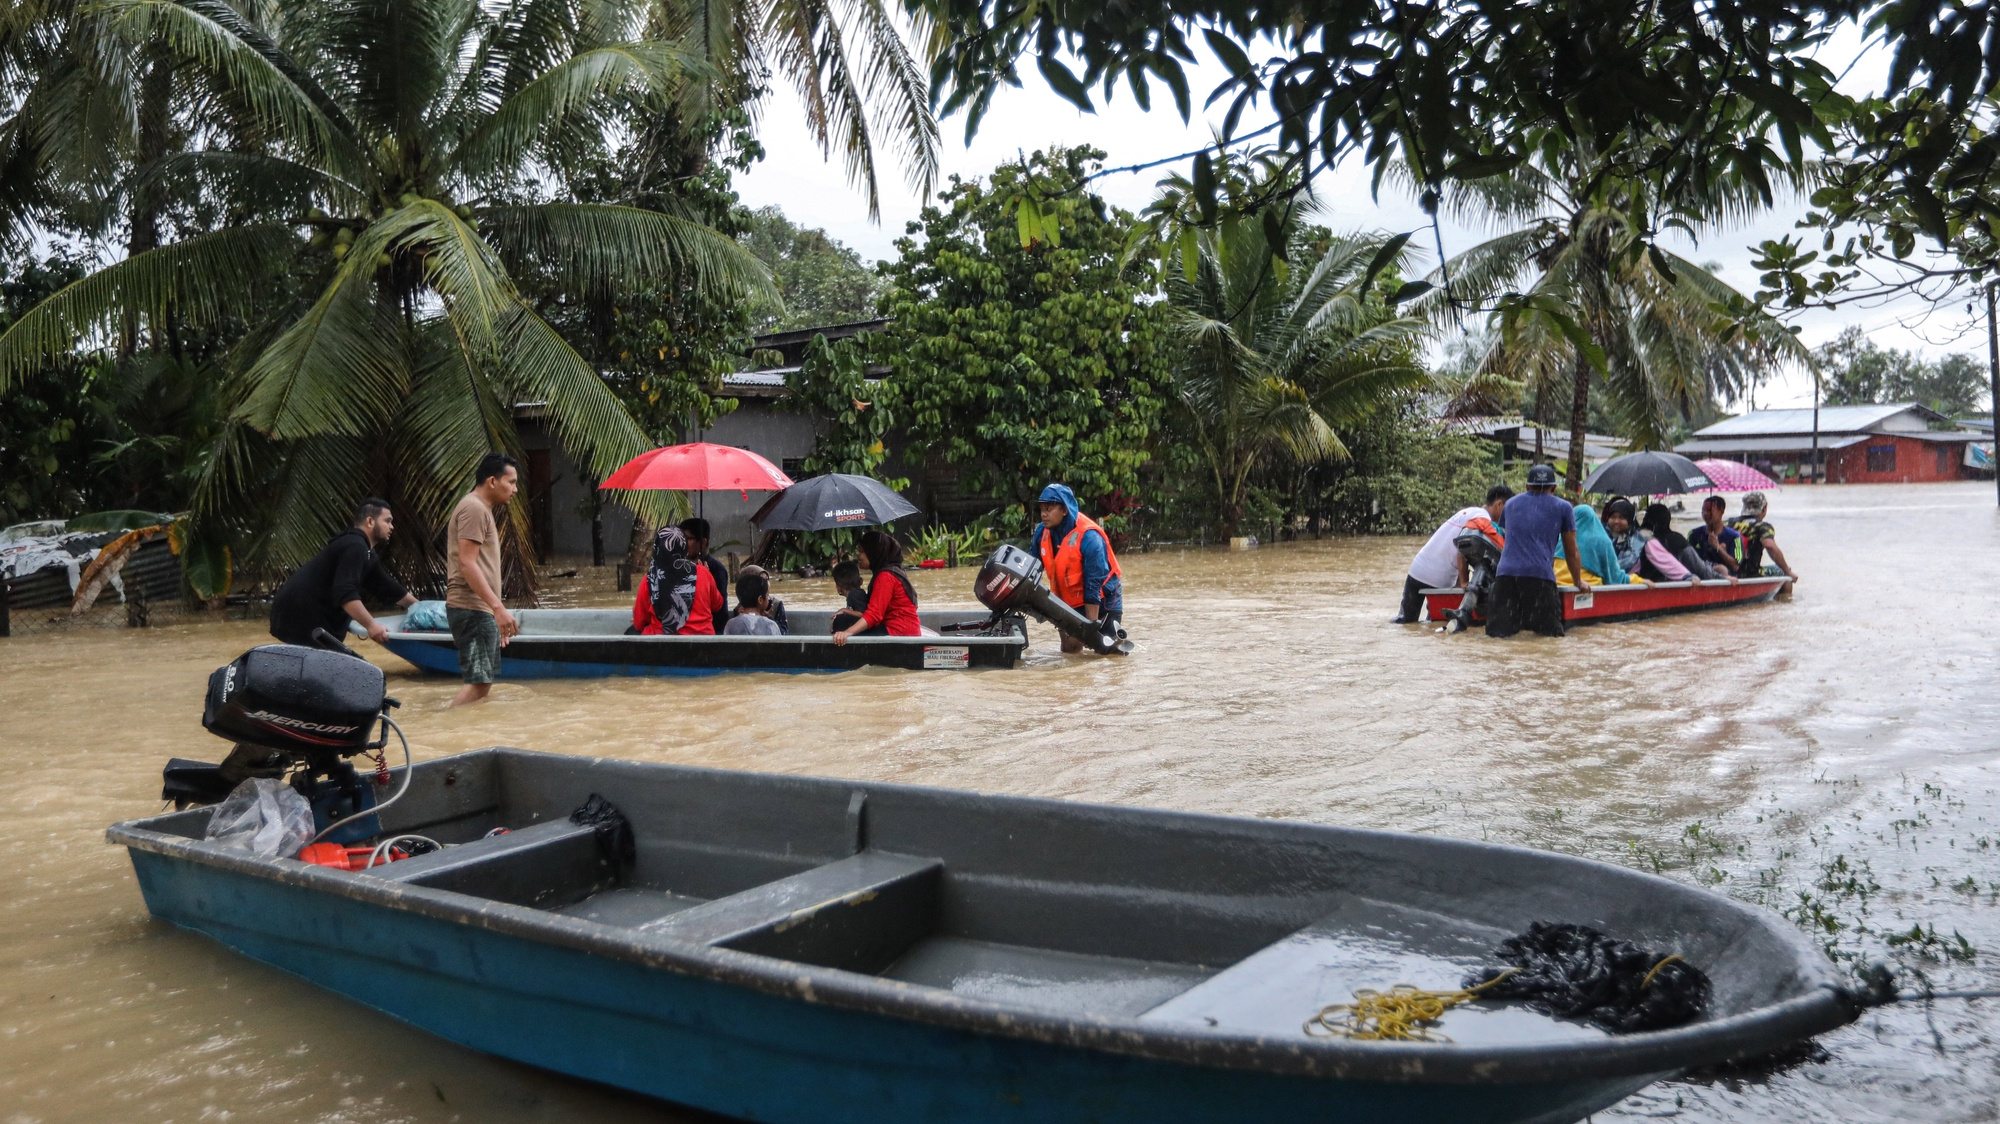 epa10375711 People use boats through a flooded area in Kuala Terengganu, Malaysia, 21 December 2022. According to Malaysian authorities, five people were killed and more than 70,000 were evacuated after monsoons triggered floods that inundated the state of Kelantan, Terengganu and Pahang.  EPA/STR